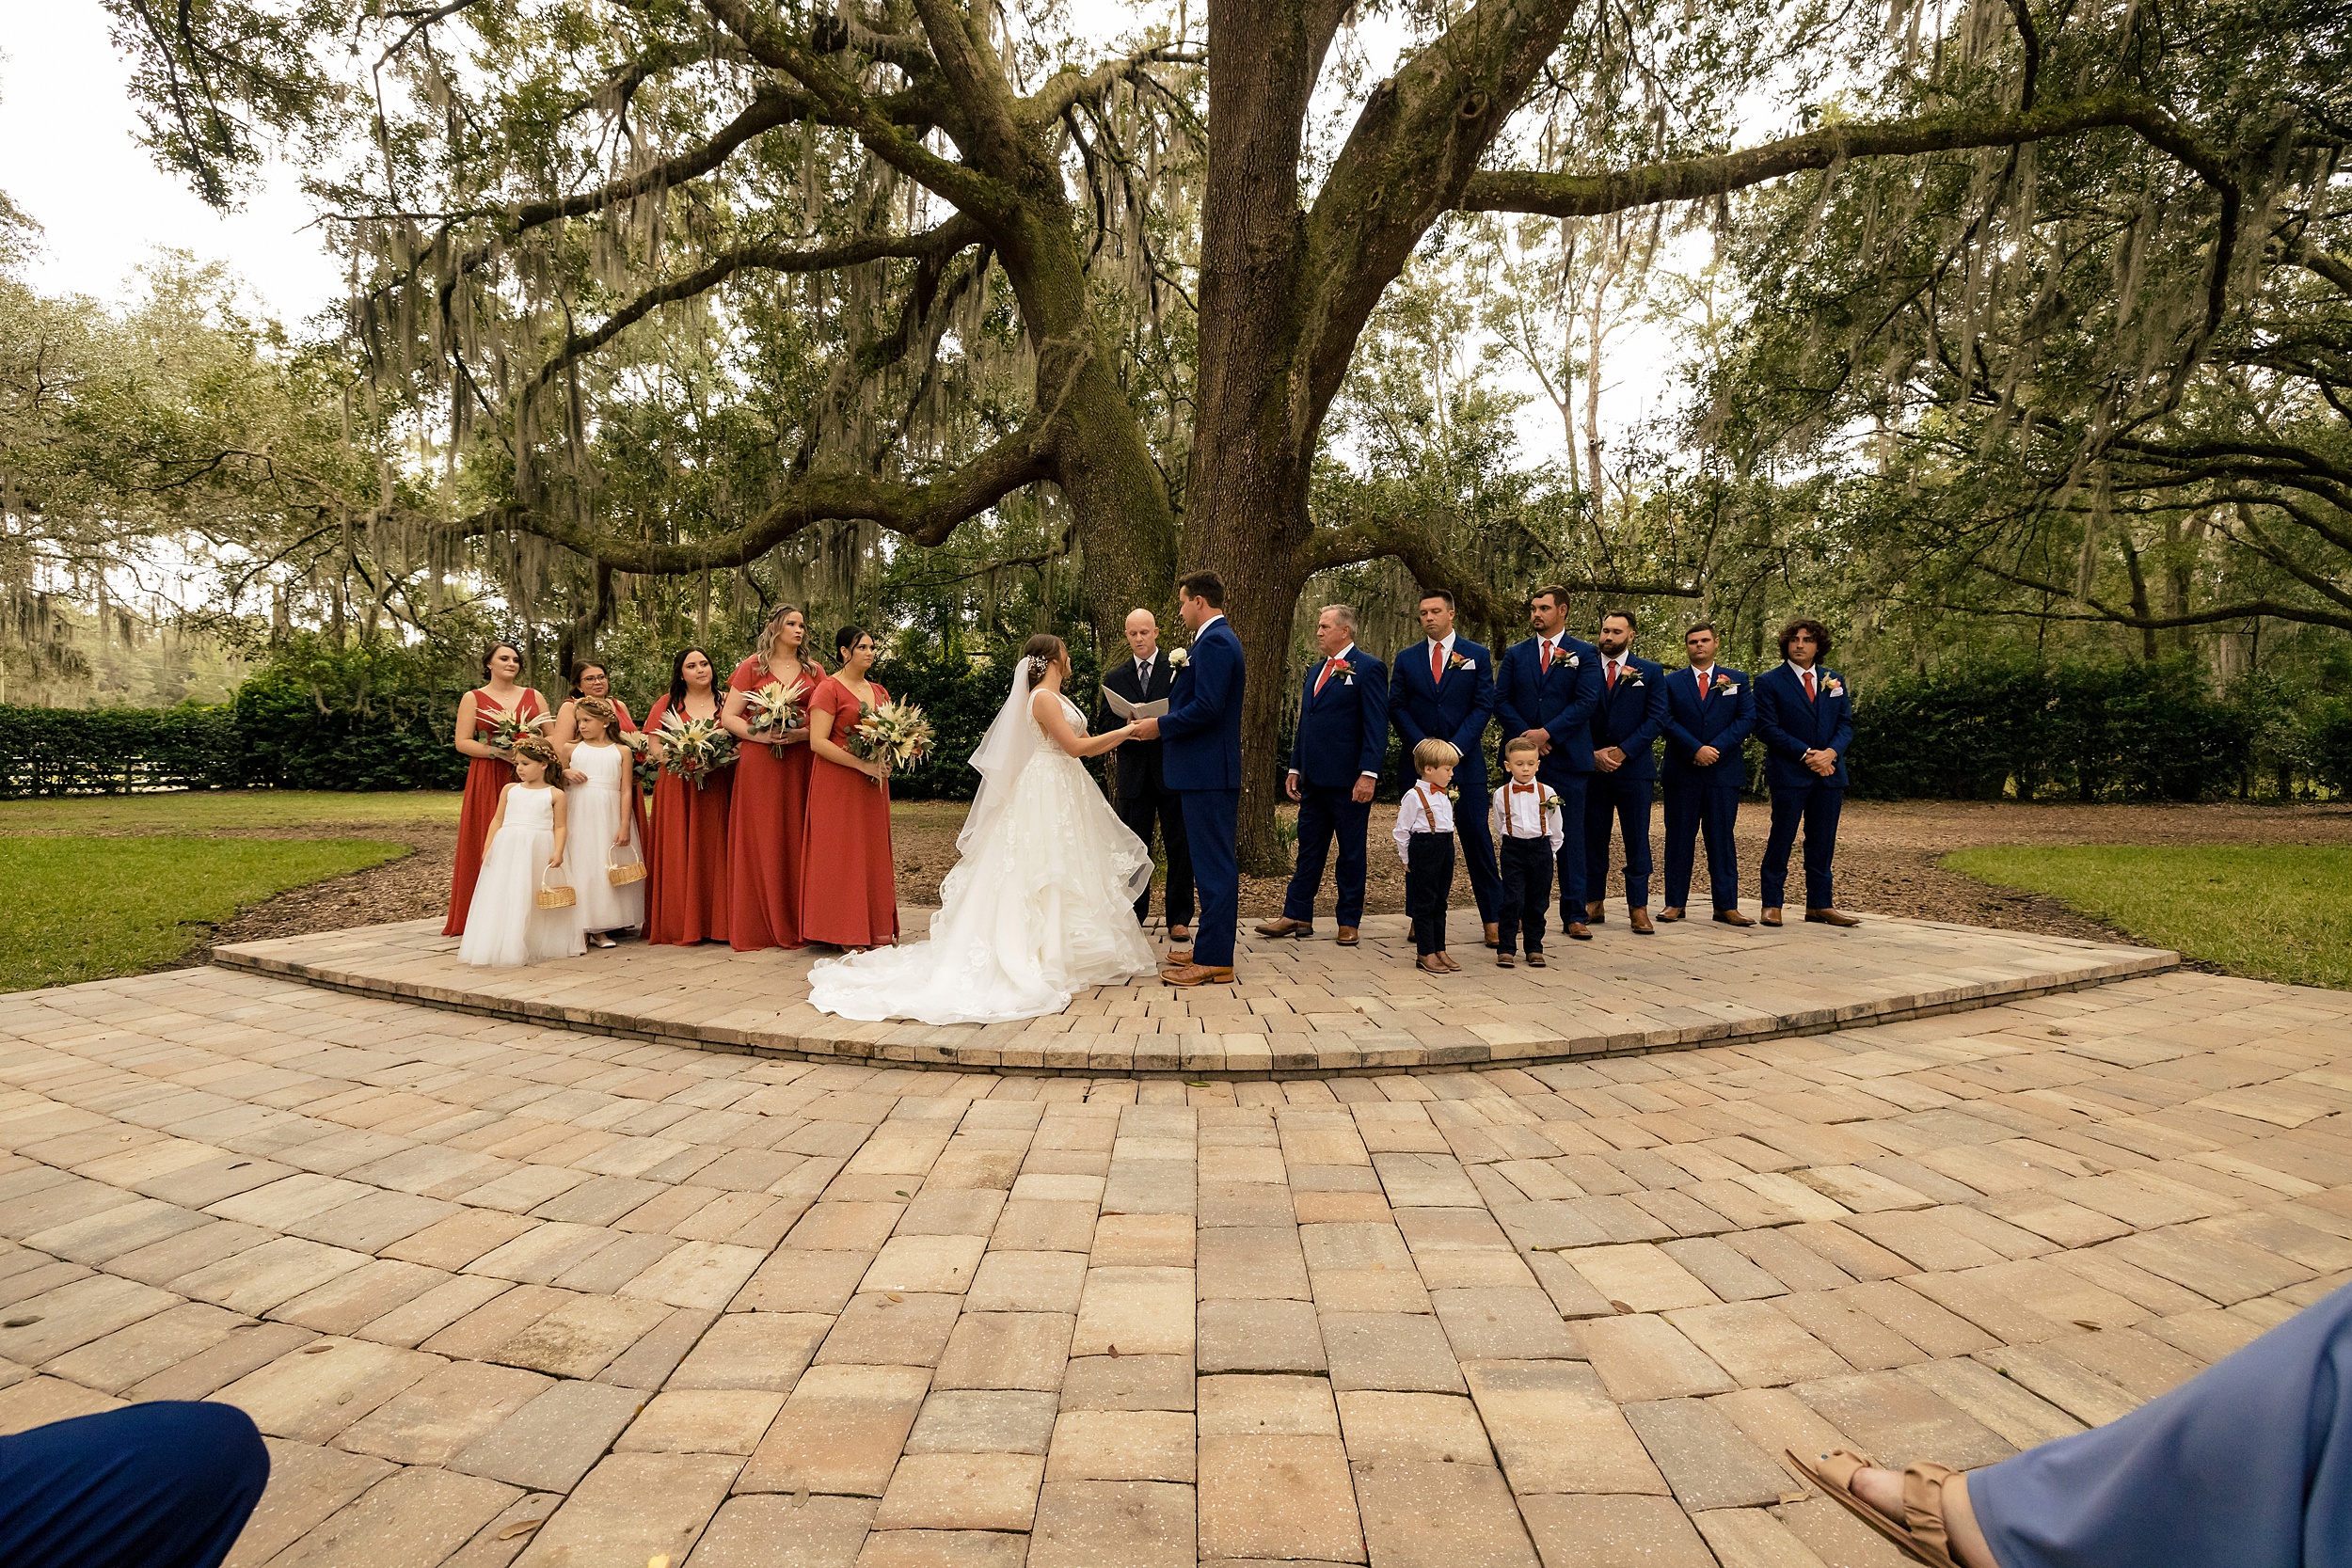 Newlyweds hold hands at the altar of their outdoor wedding ceremony